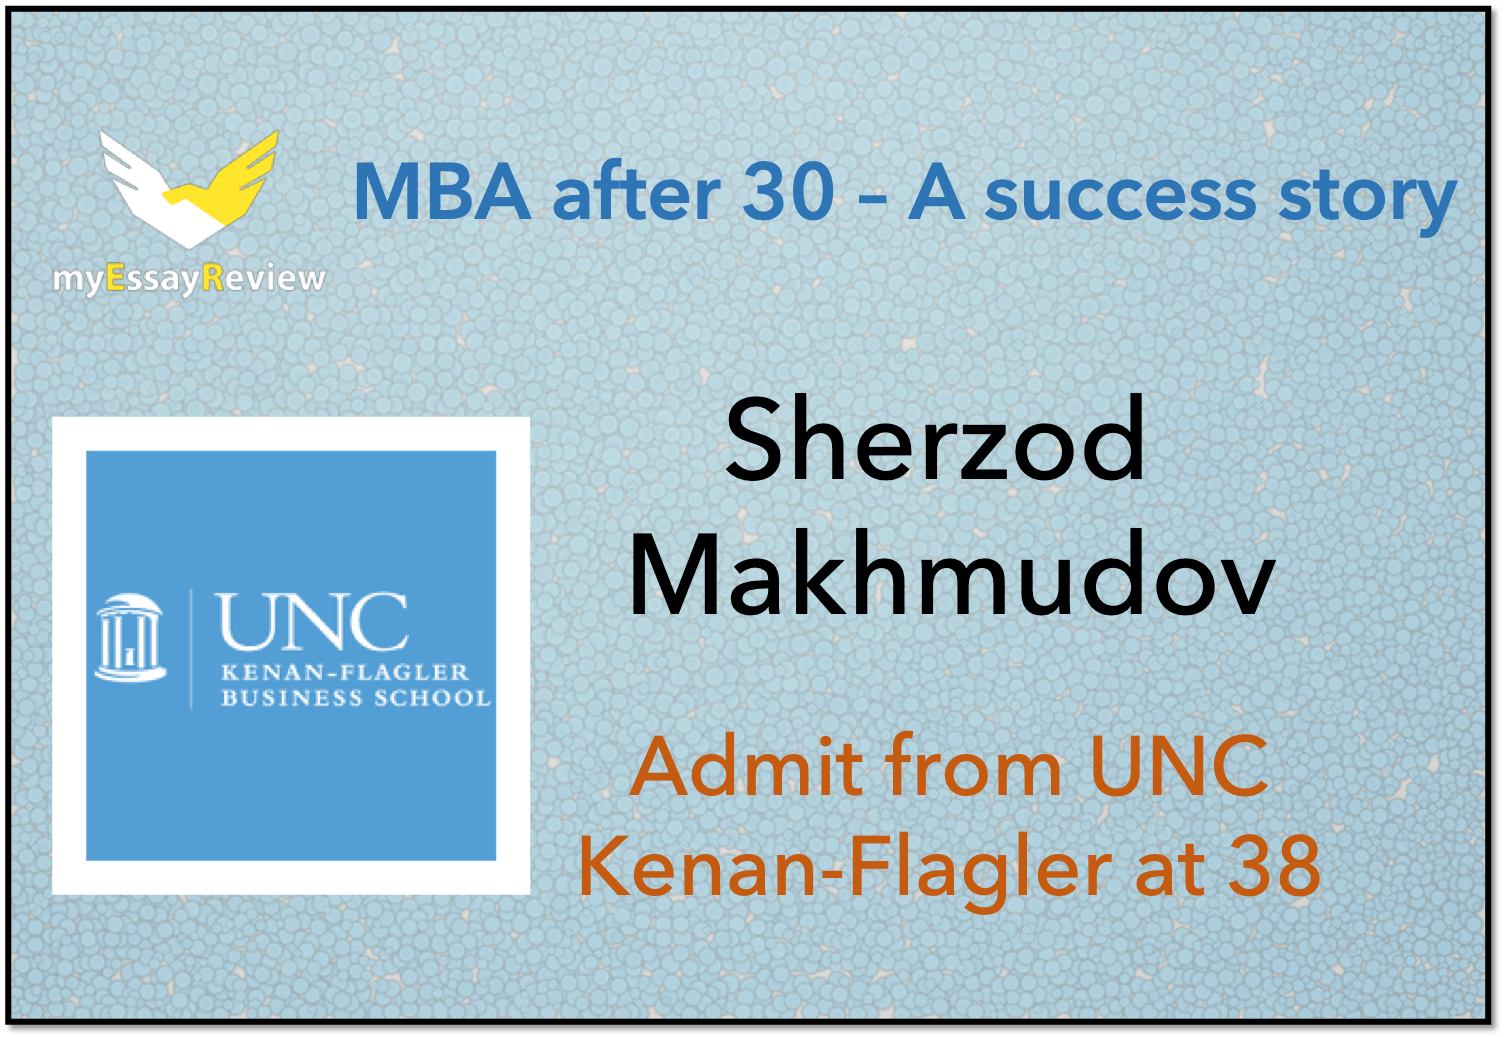 MBA after 30 – How Sherzod got into Kenan Flagler full-time MBA at 38